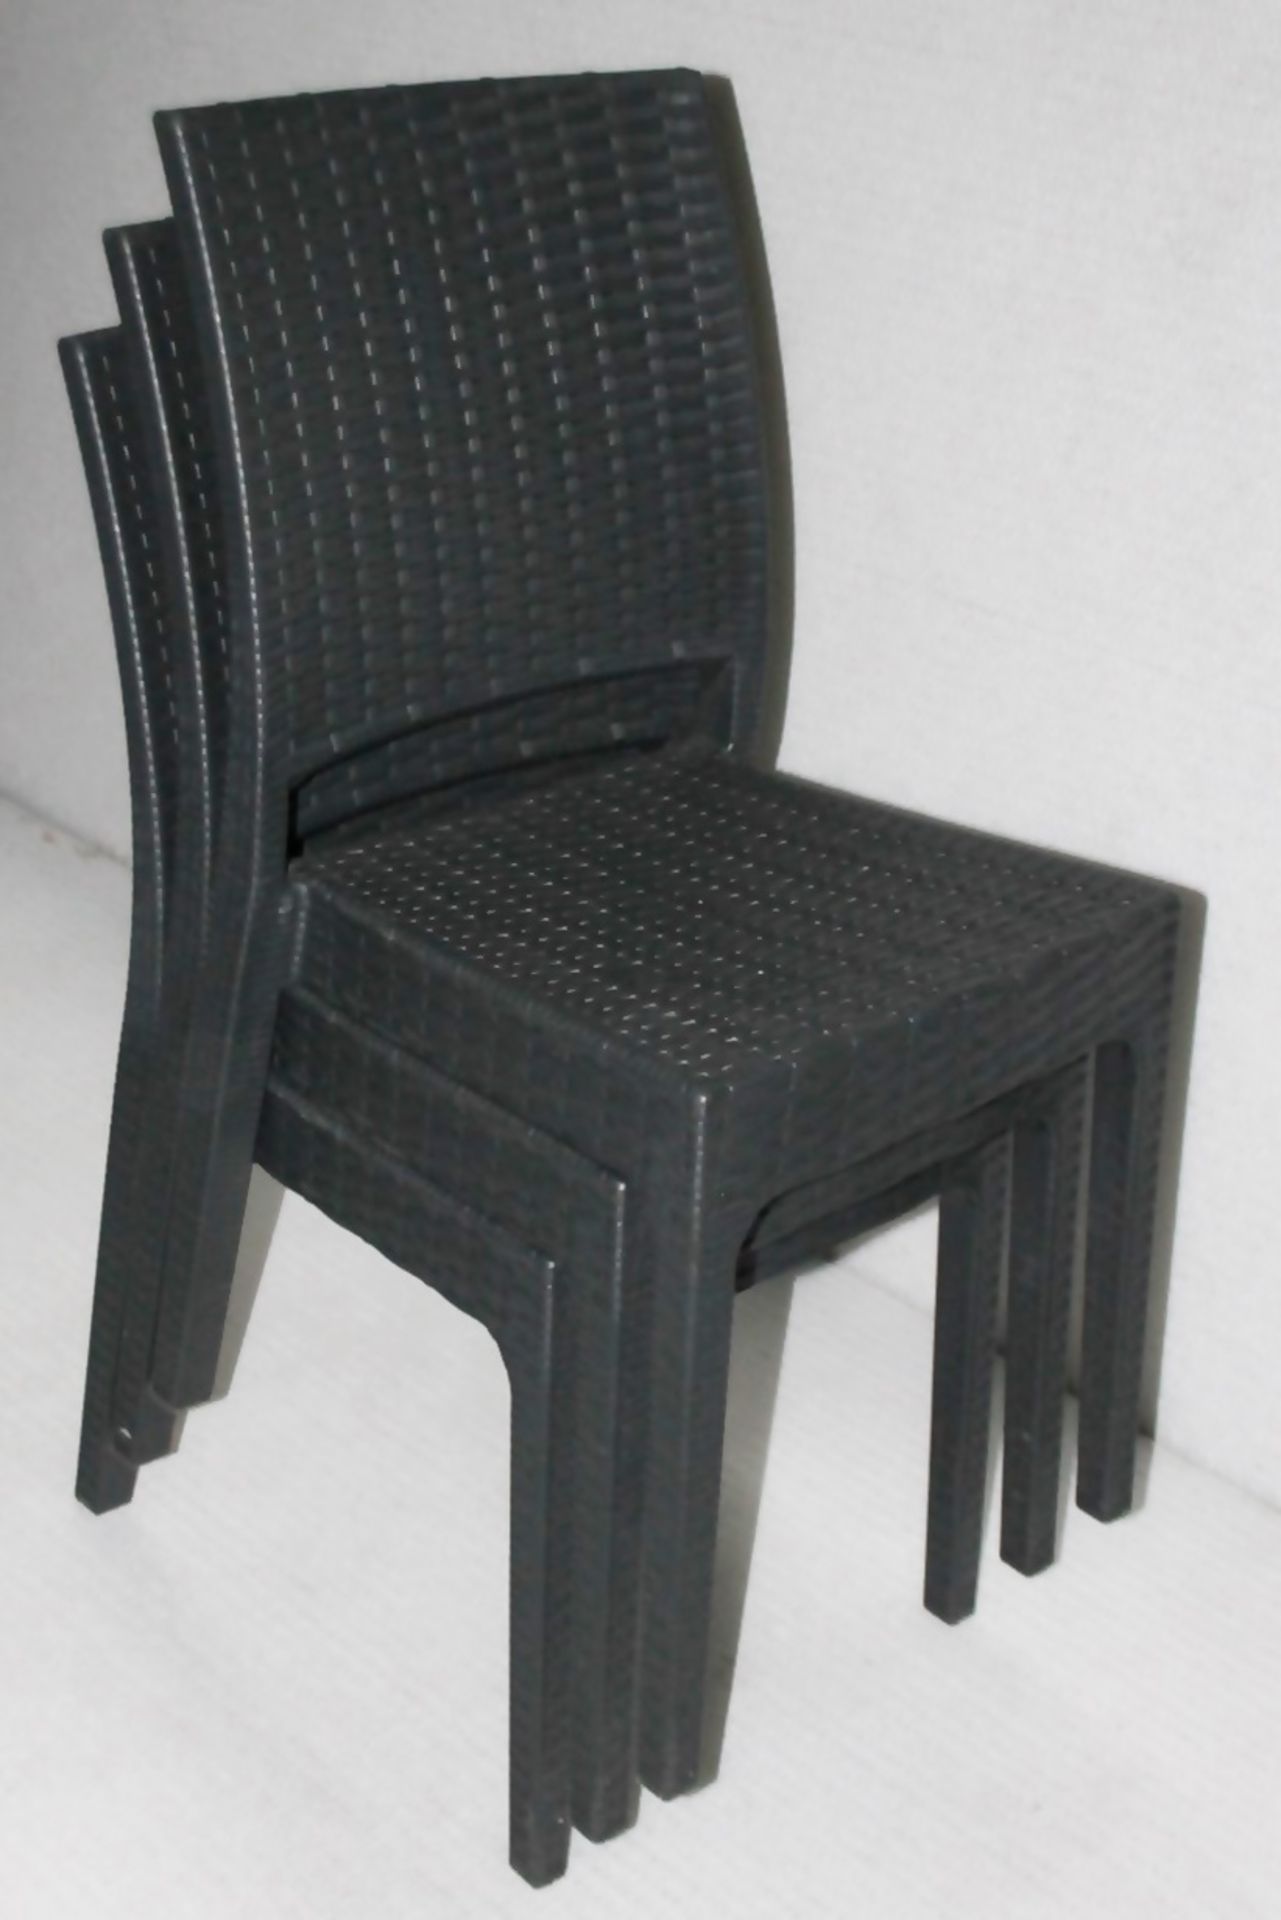 8 x SIESTA EXCLUSIVE 'Florida' Commercial Stackable Rattan-style Chairs In Dark Grey - Image 4 of 13